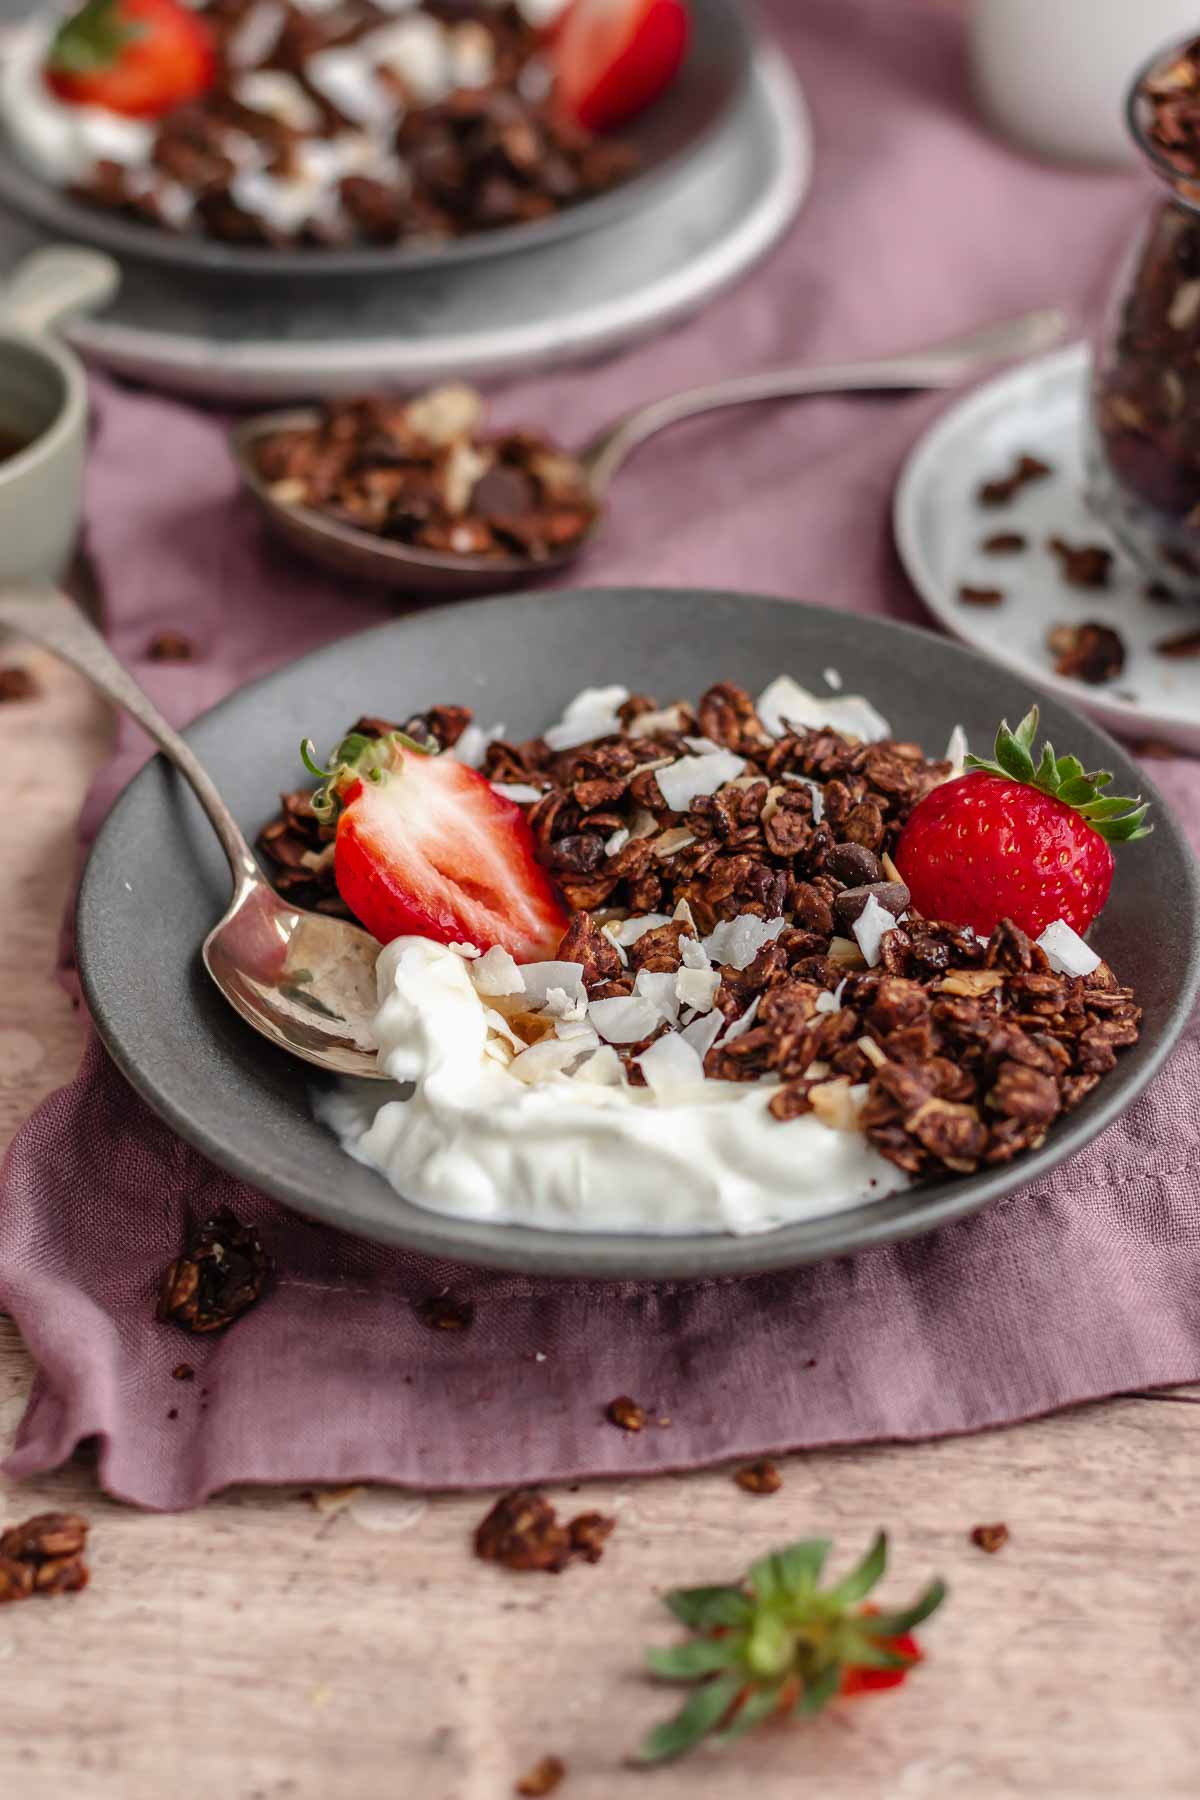 Granola and yogurt in a bowl with a spoon and strawberries.